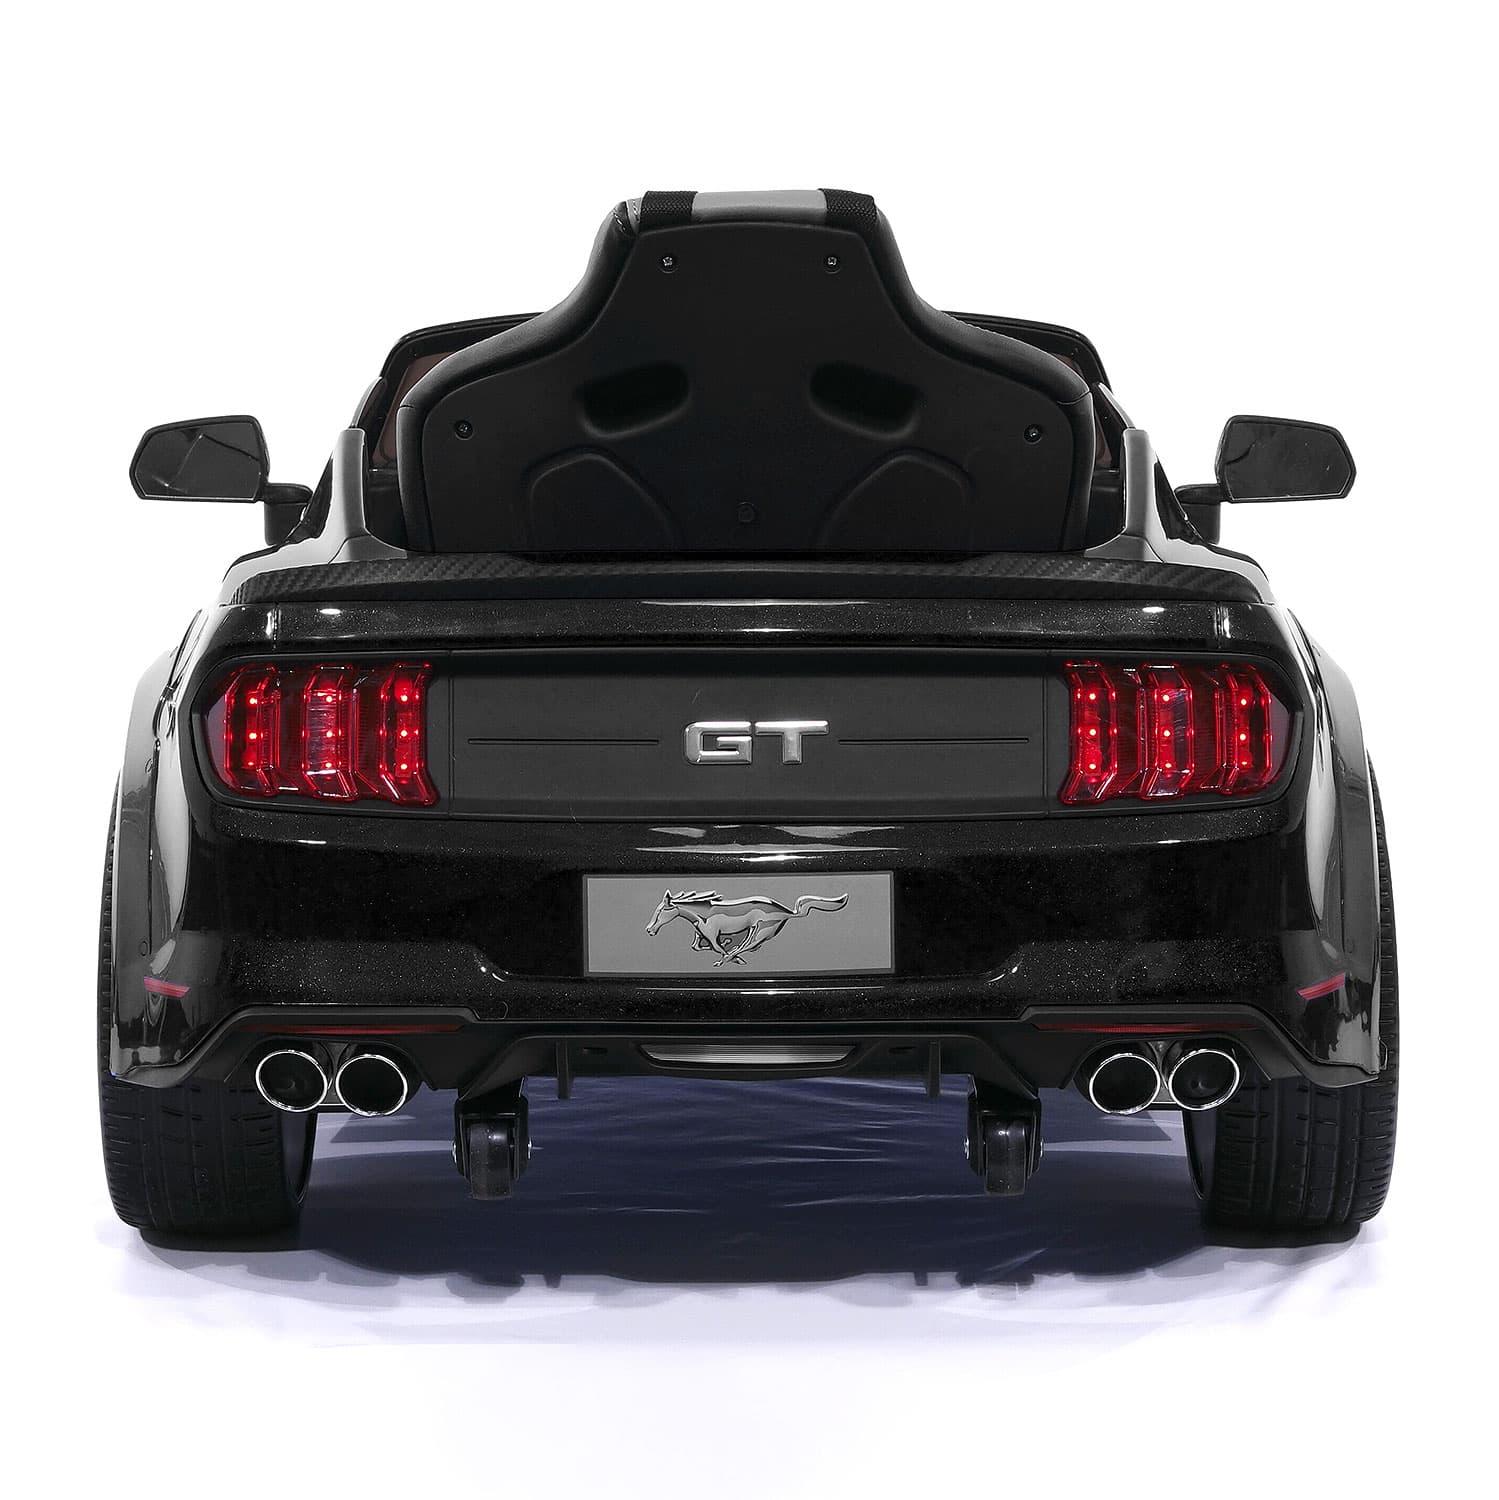 Ford Mustang Gt Custom Edition 24v Kids Ride-on Car With R/c Parental Remote | Black